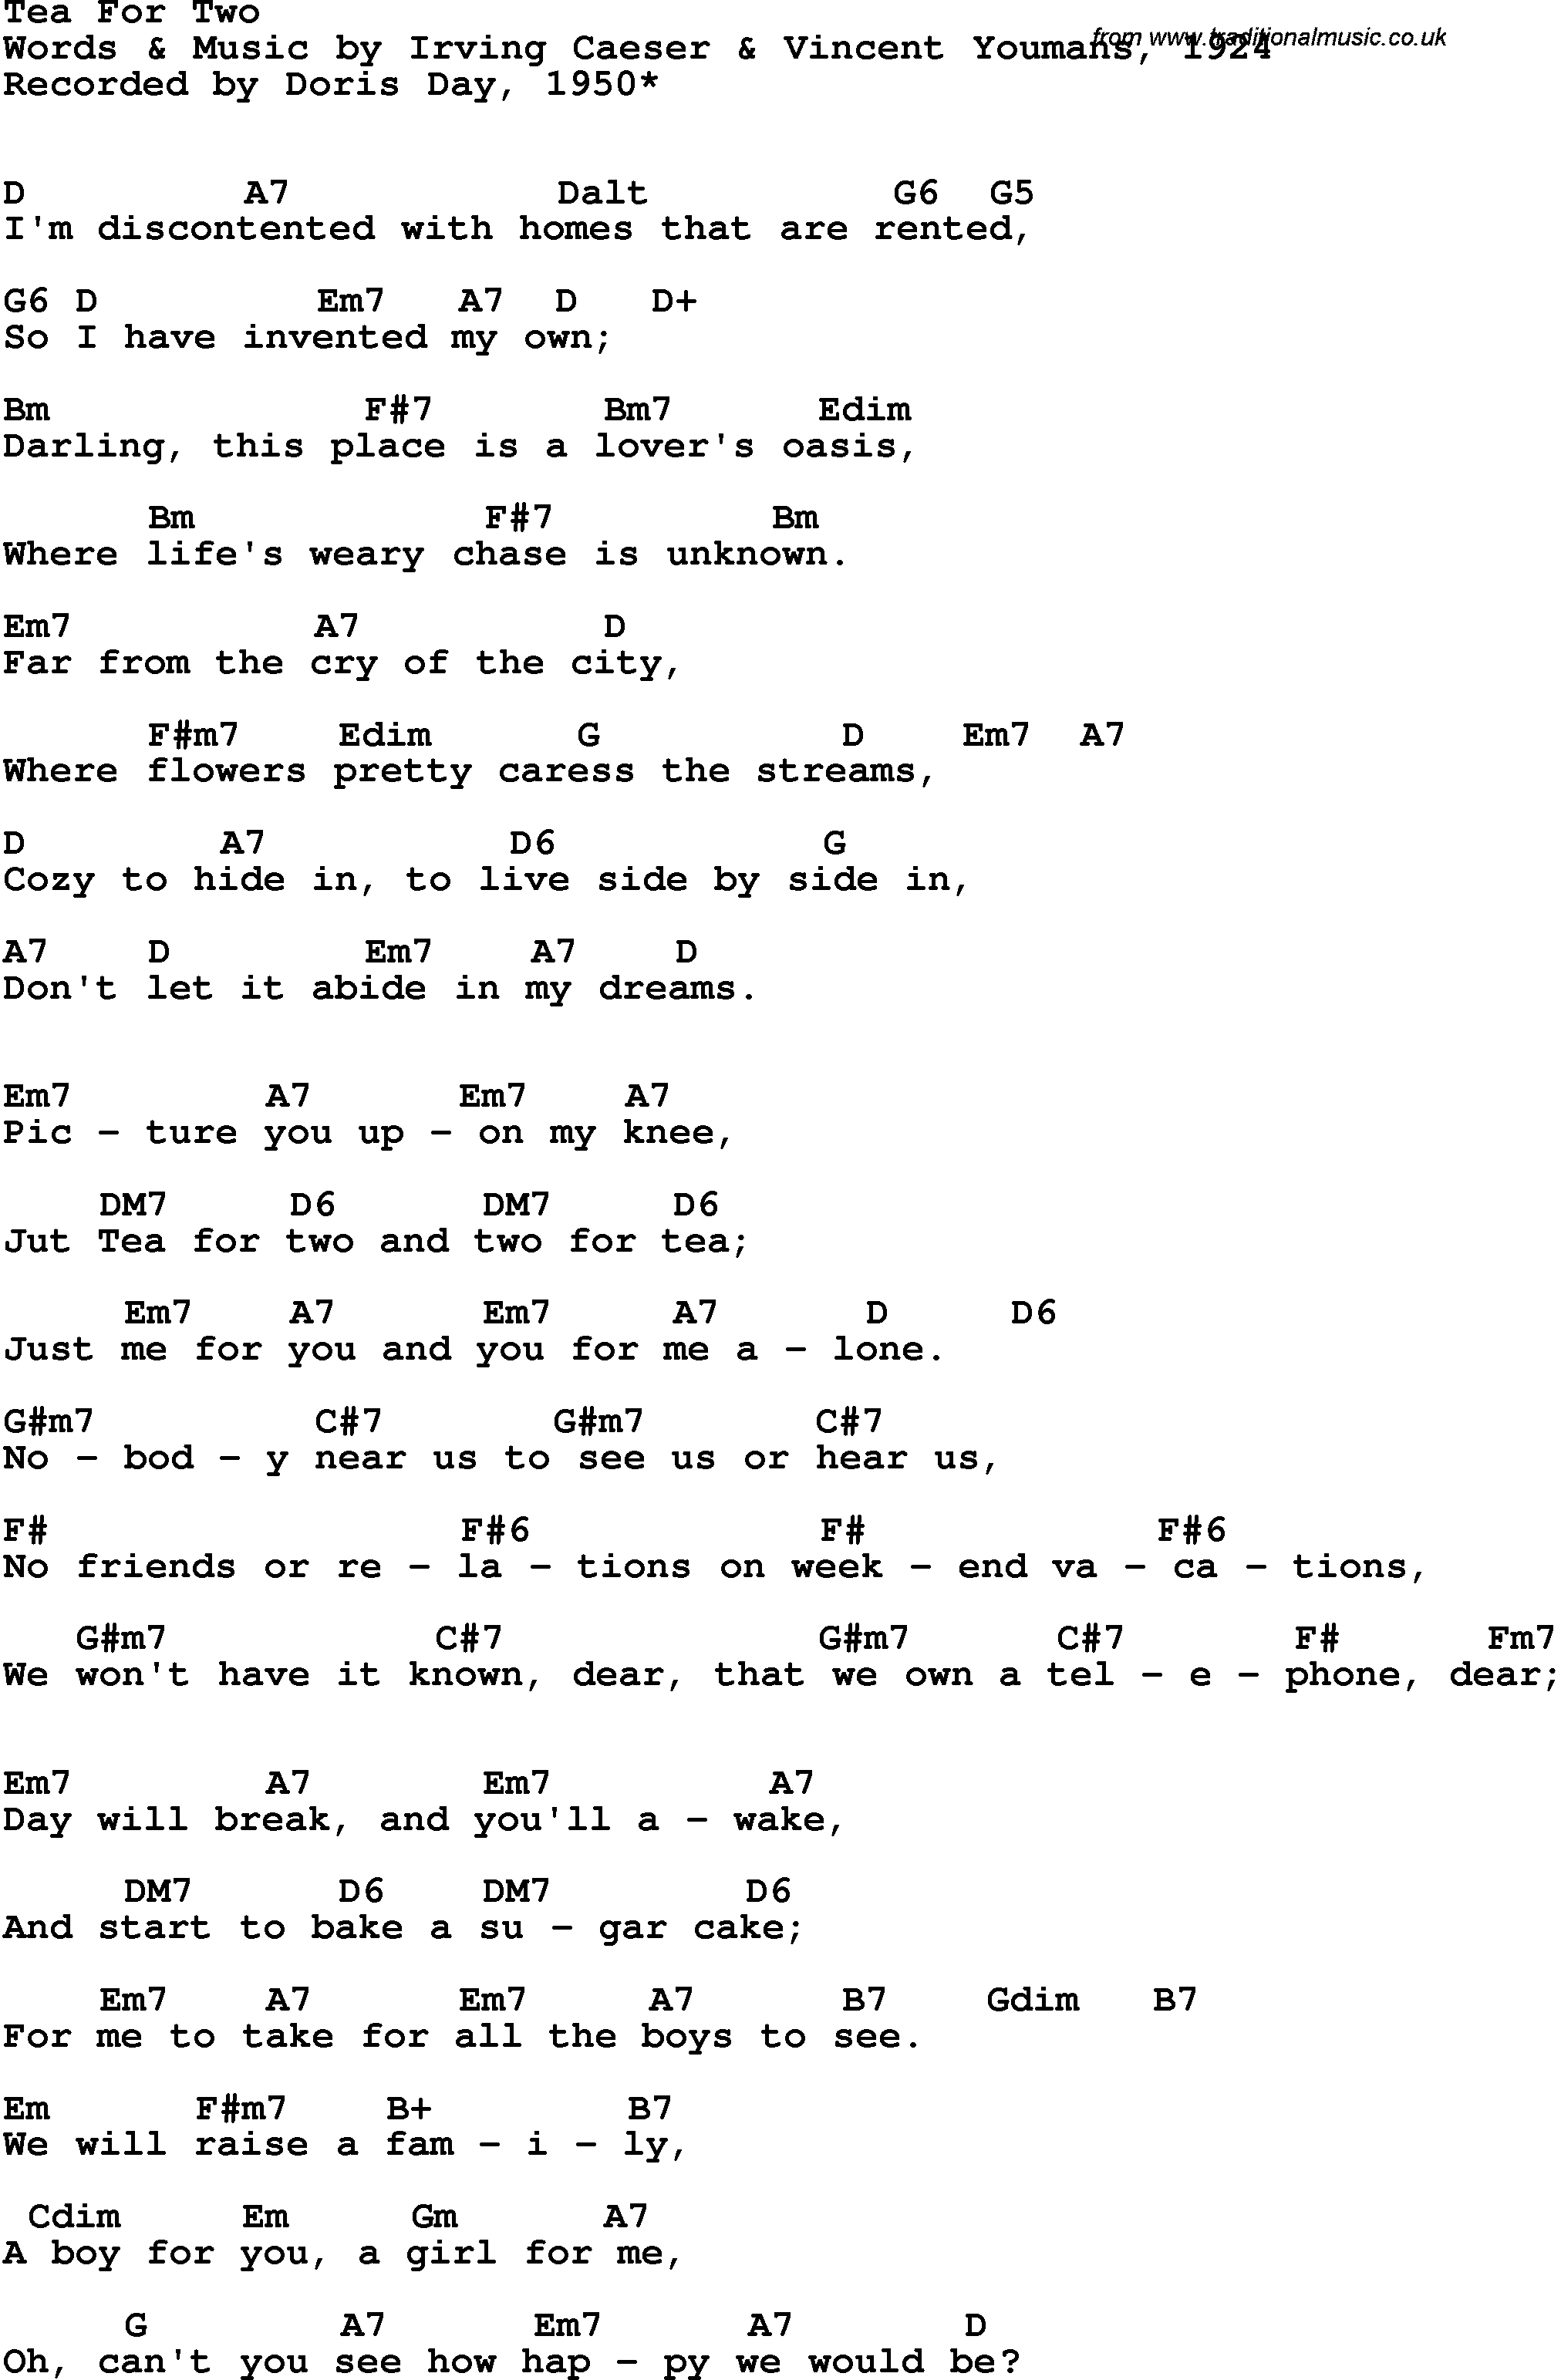 Song Lyrics with guitar chords for Tea For Two - Doris Day, 1950